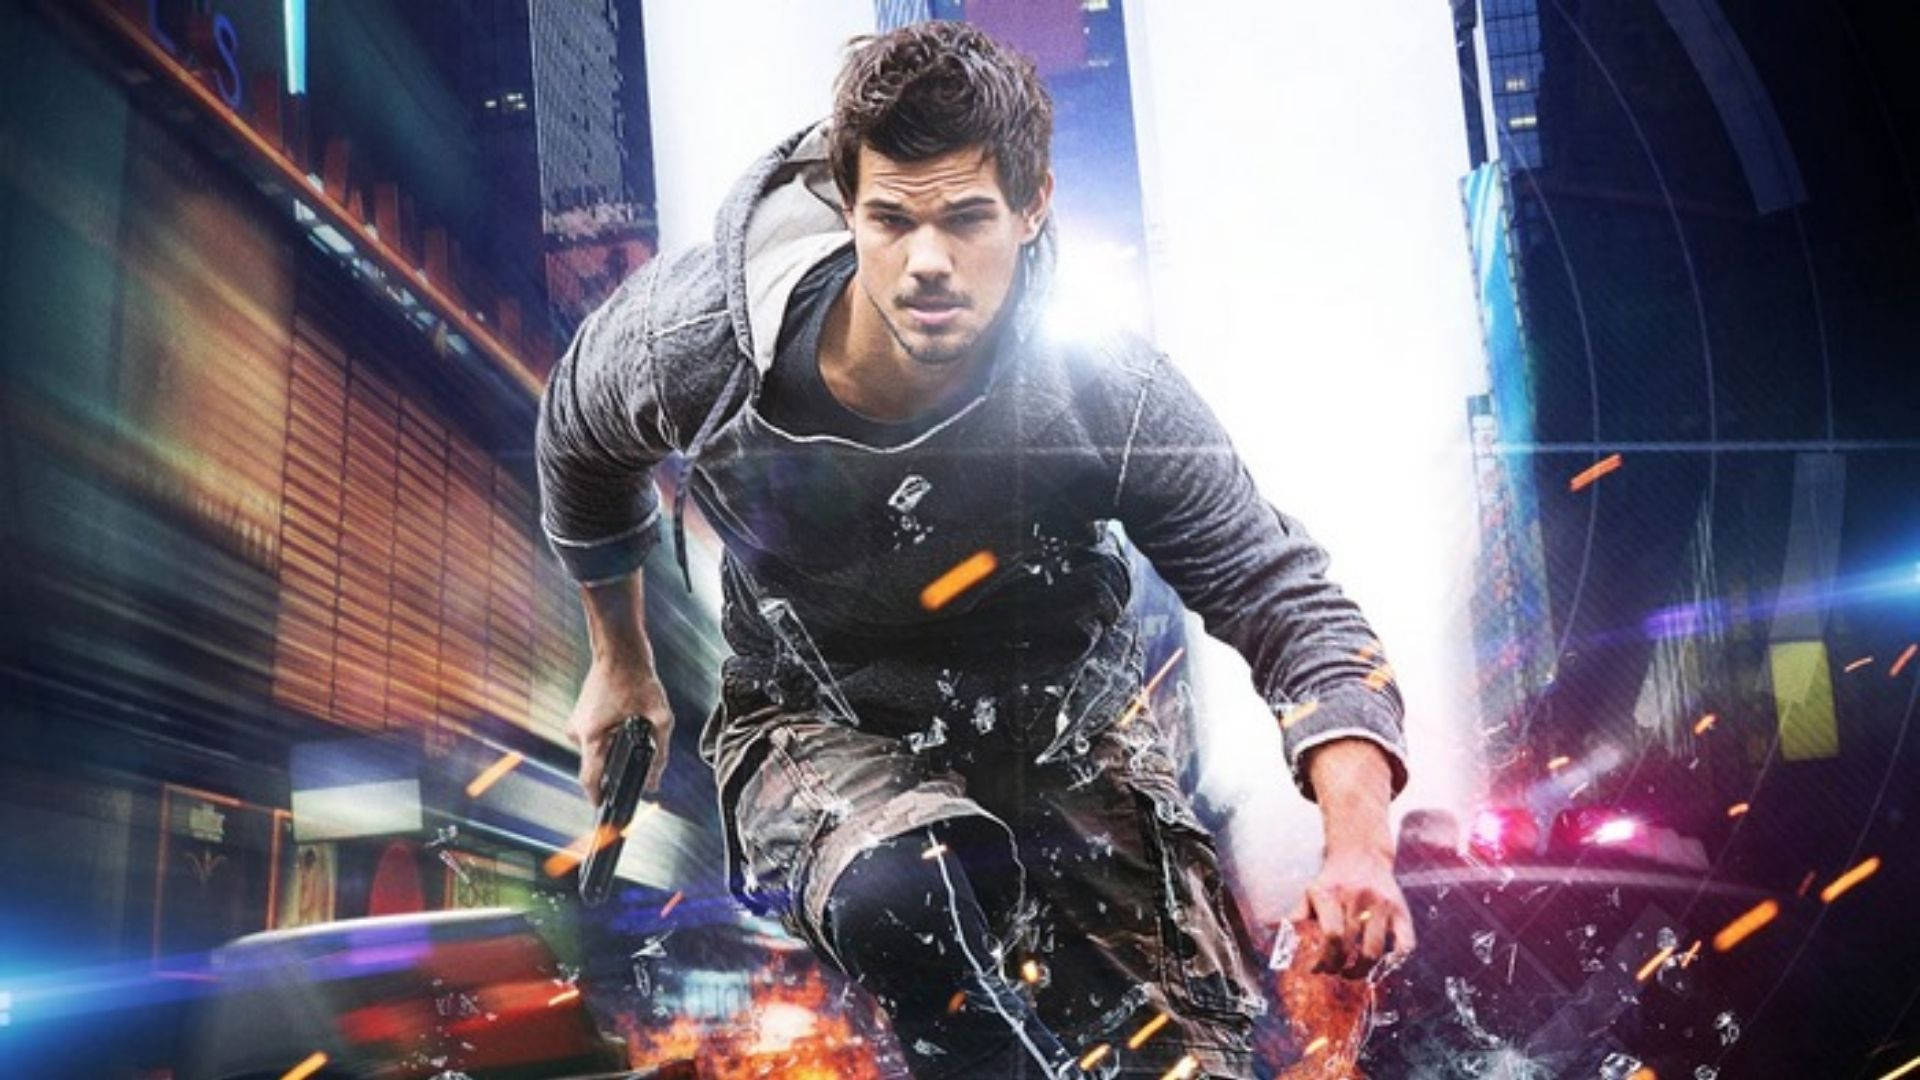 Taylor Lautner Caught In An Agile Moment